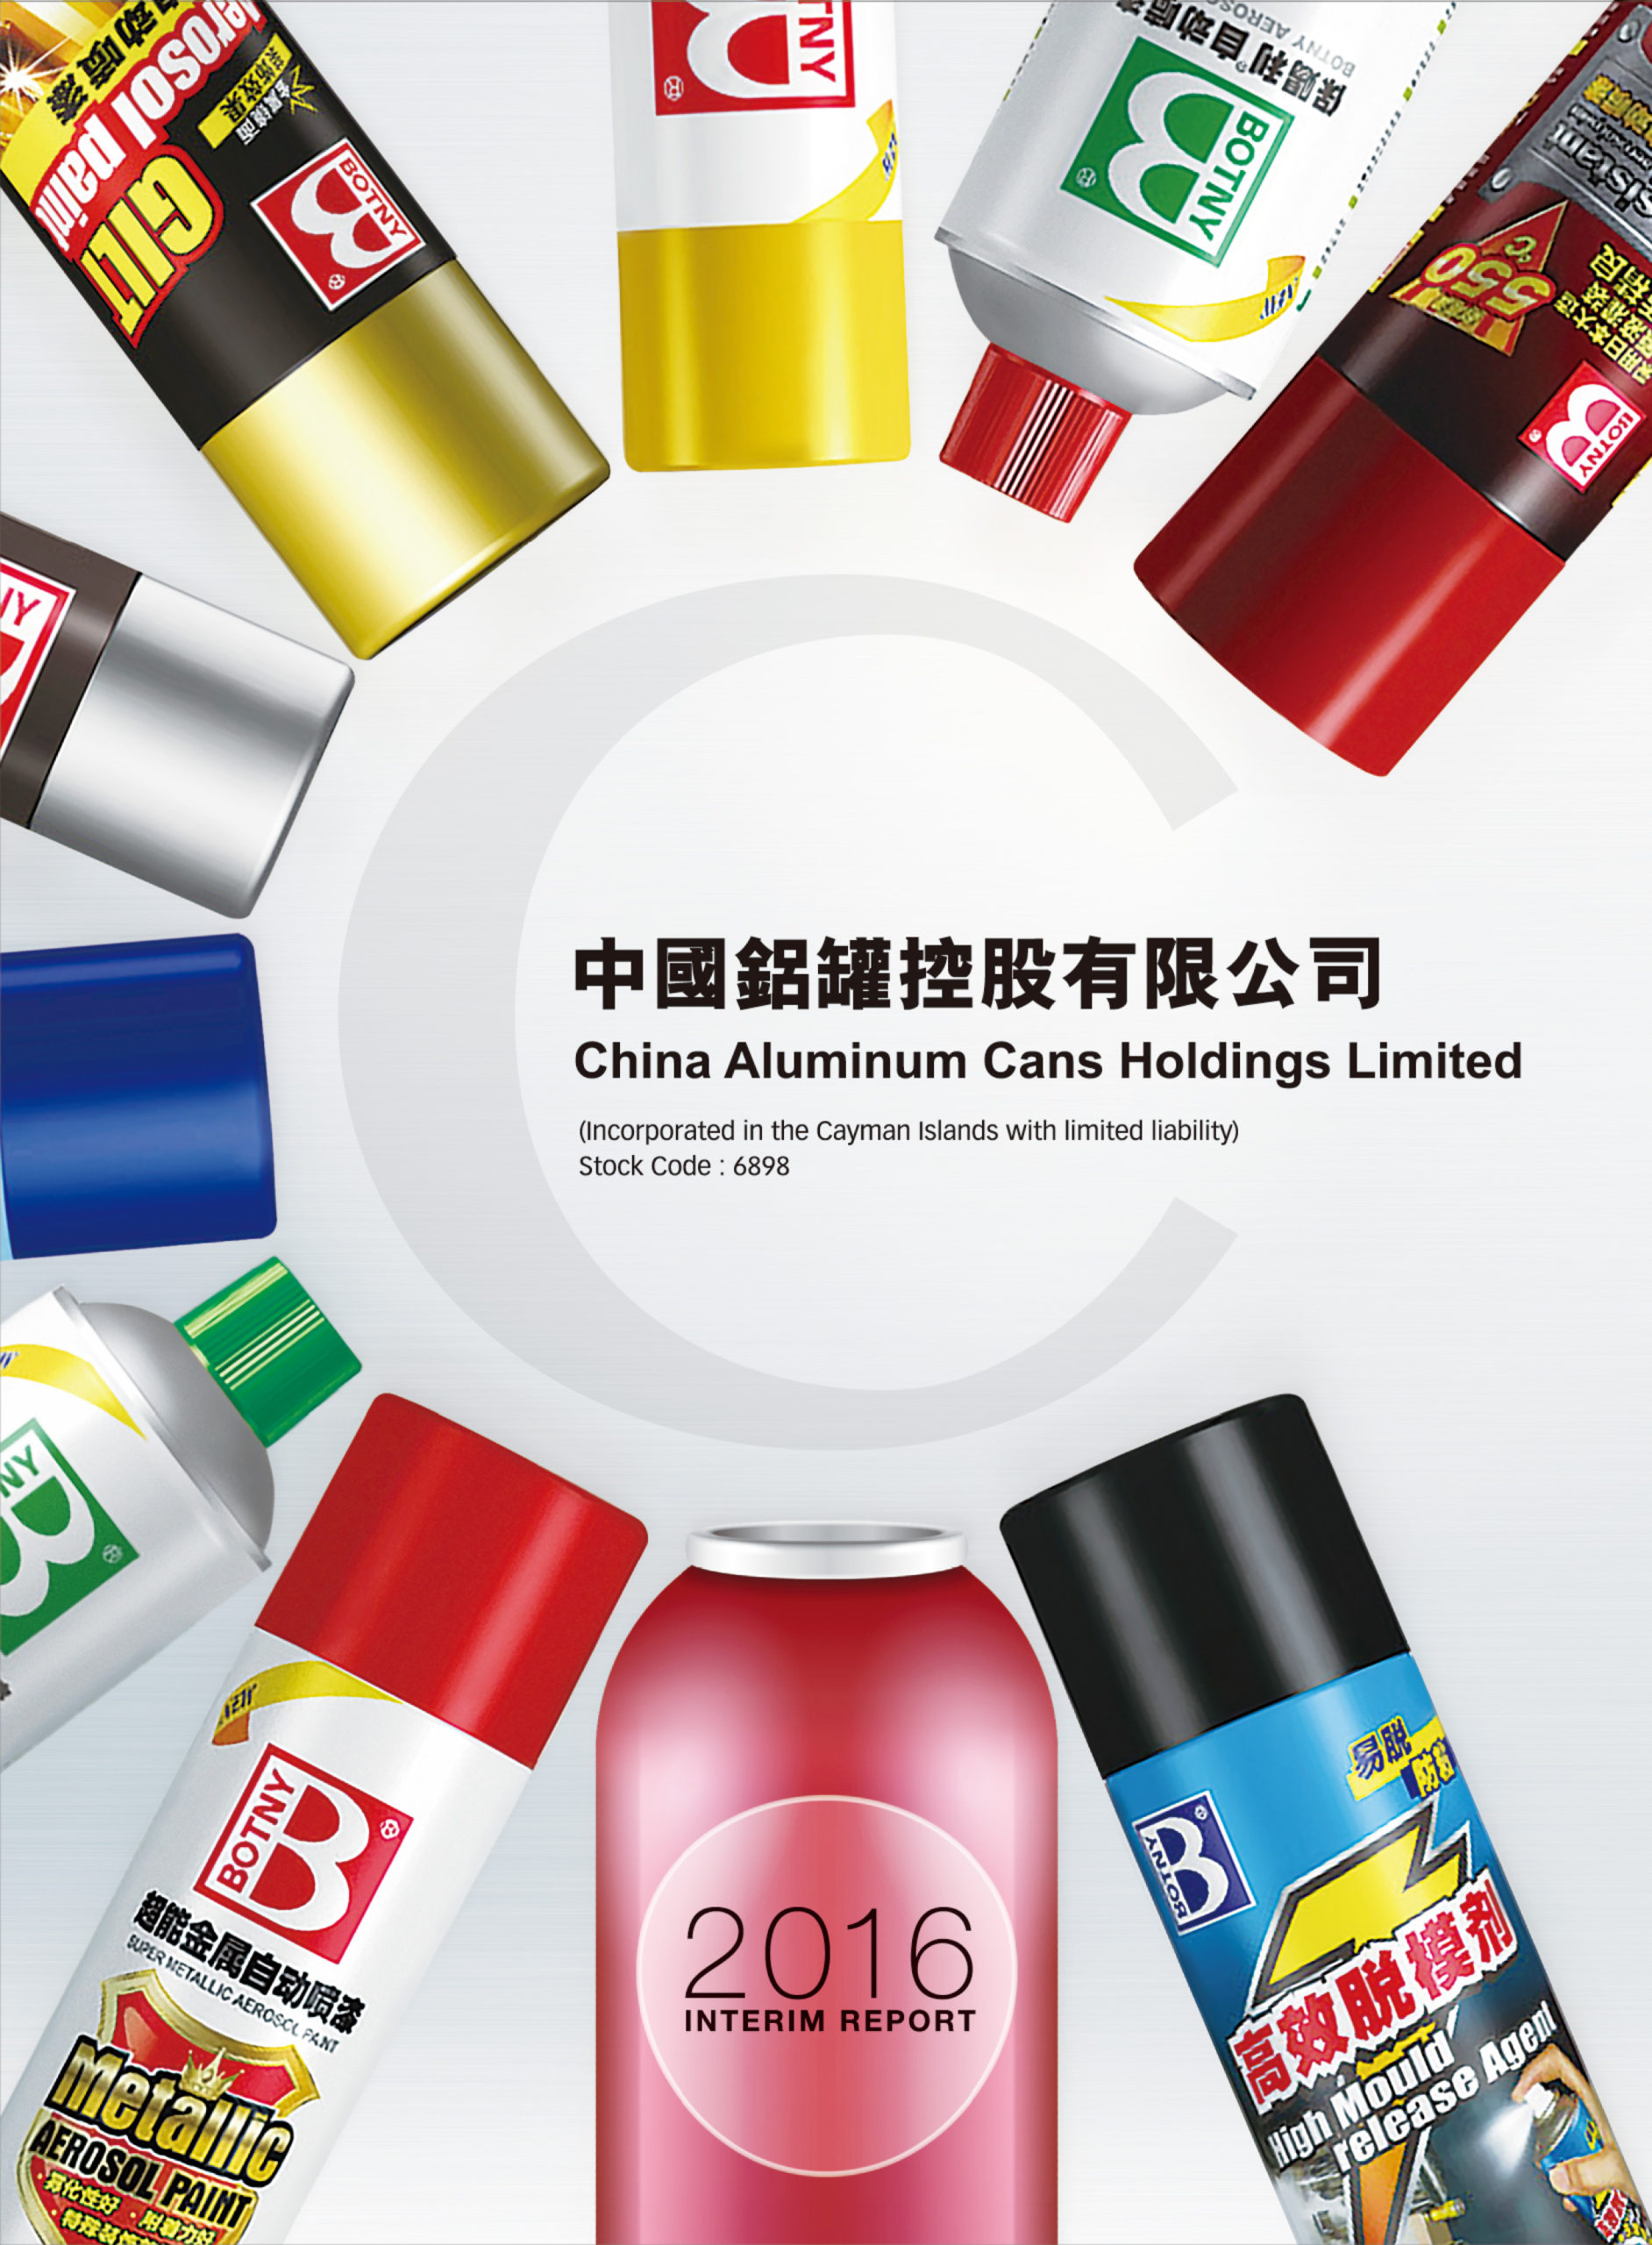 China Aluminum Cans Holdings Limited